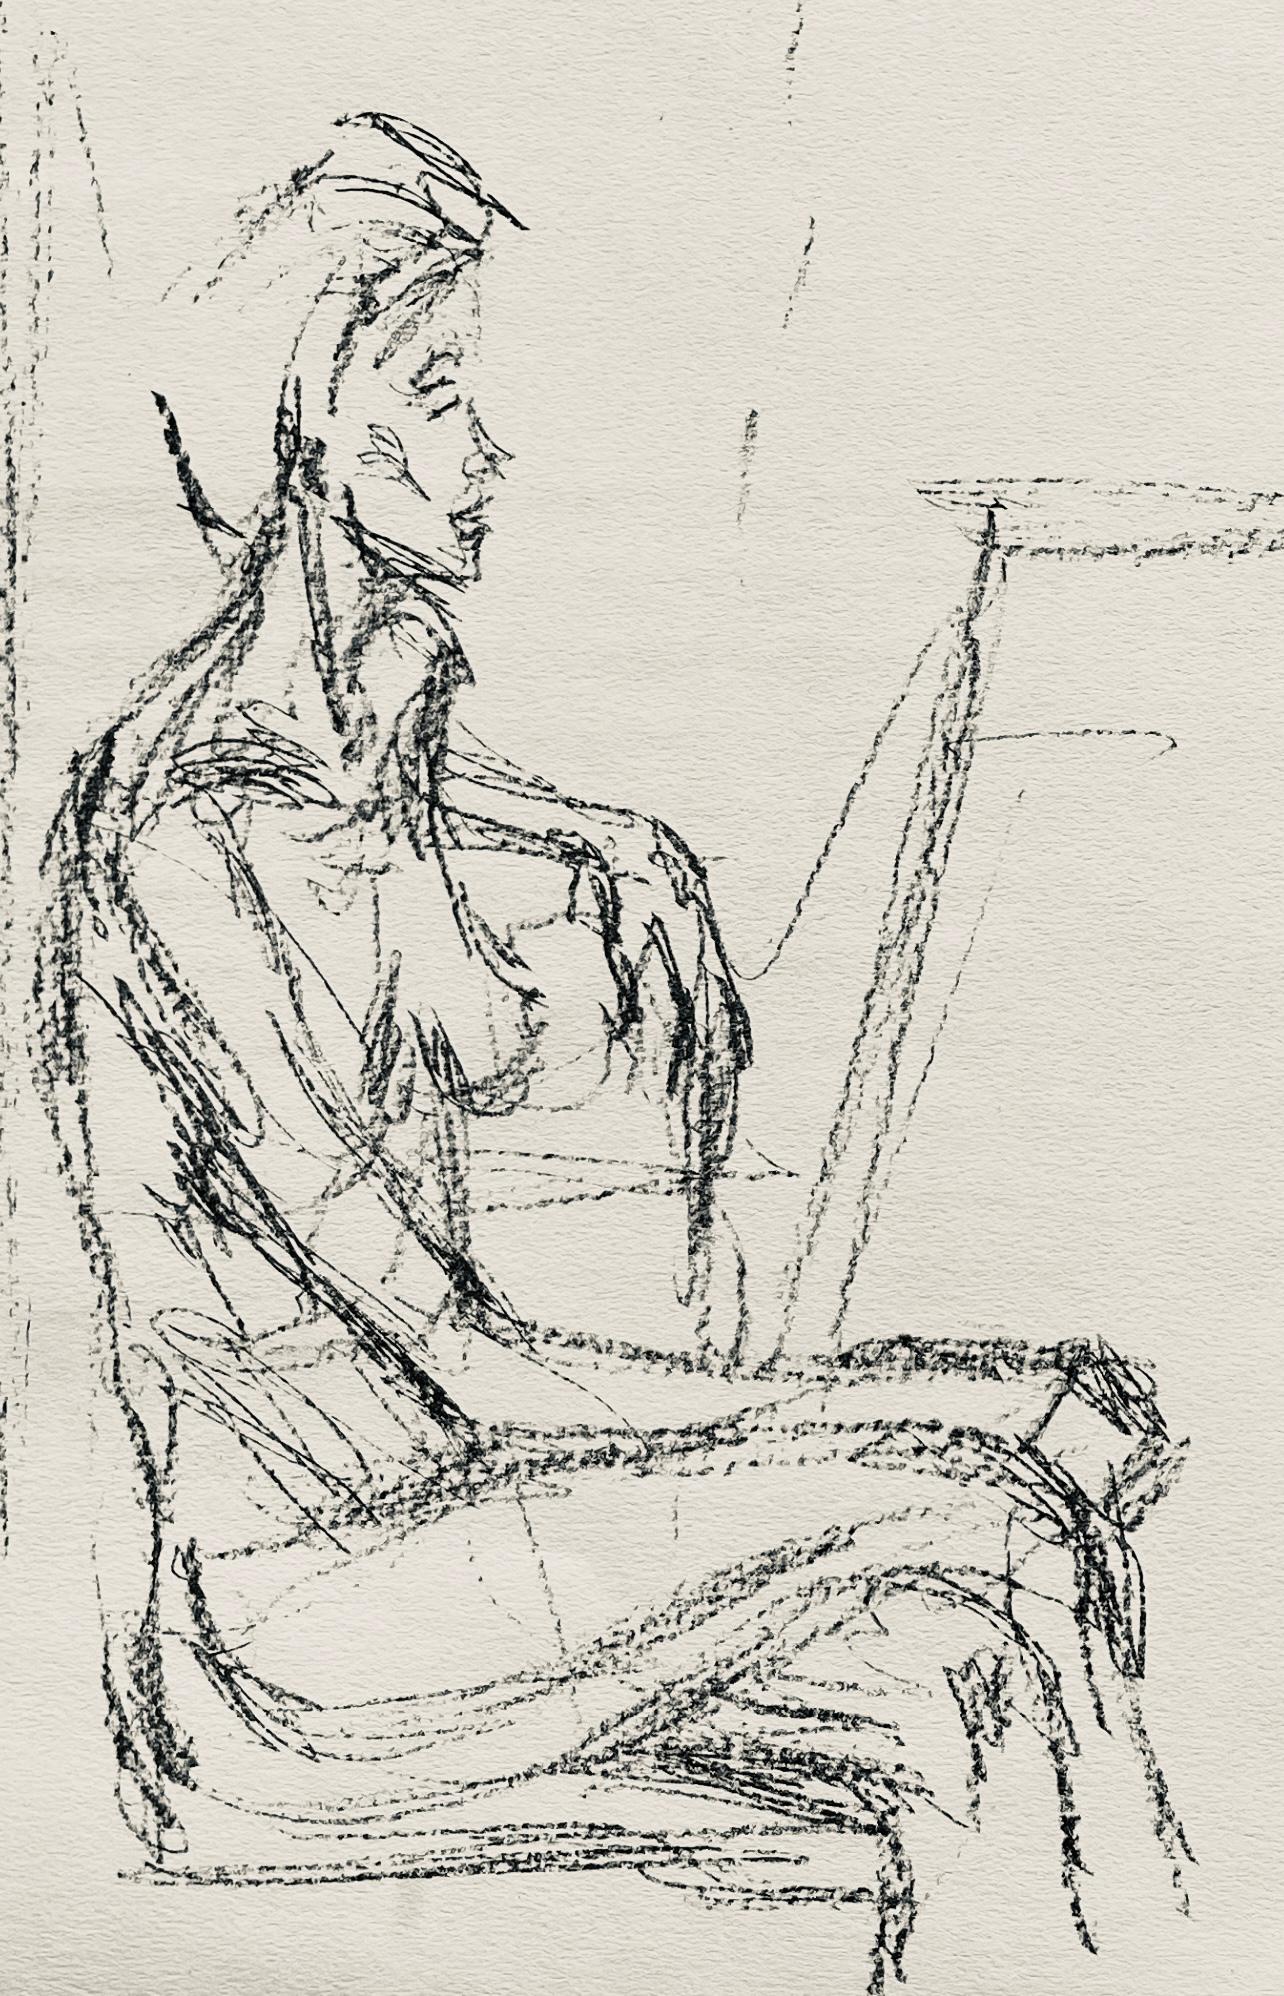 Giacometti, Composition, Derrière le miroir (after) - Print by Alberto Giacometti